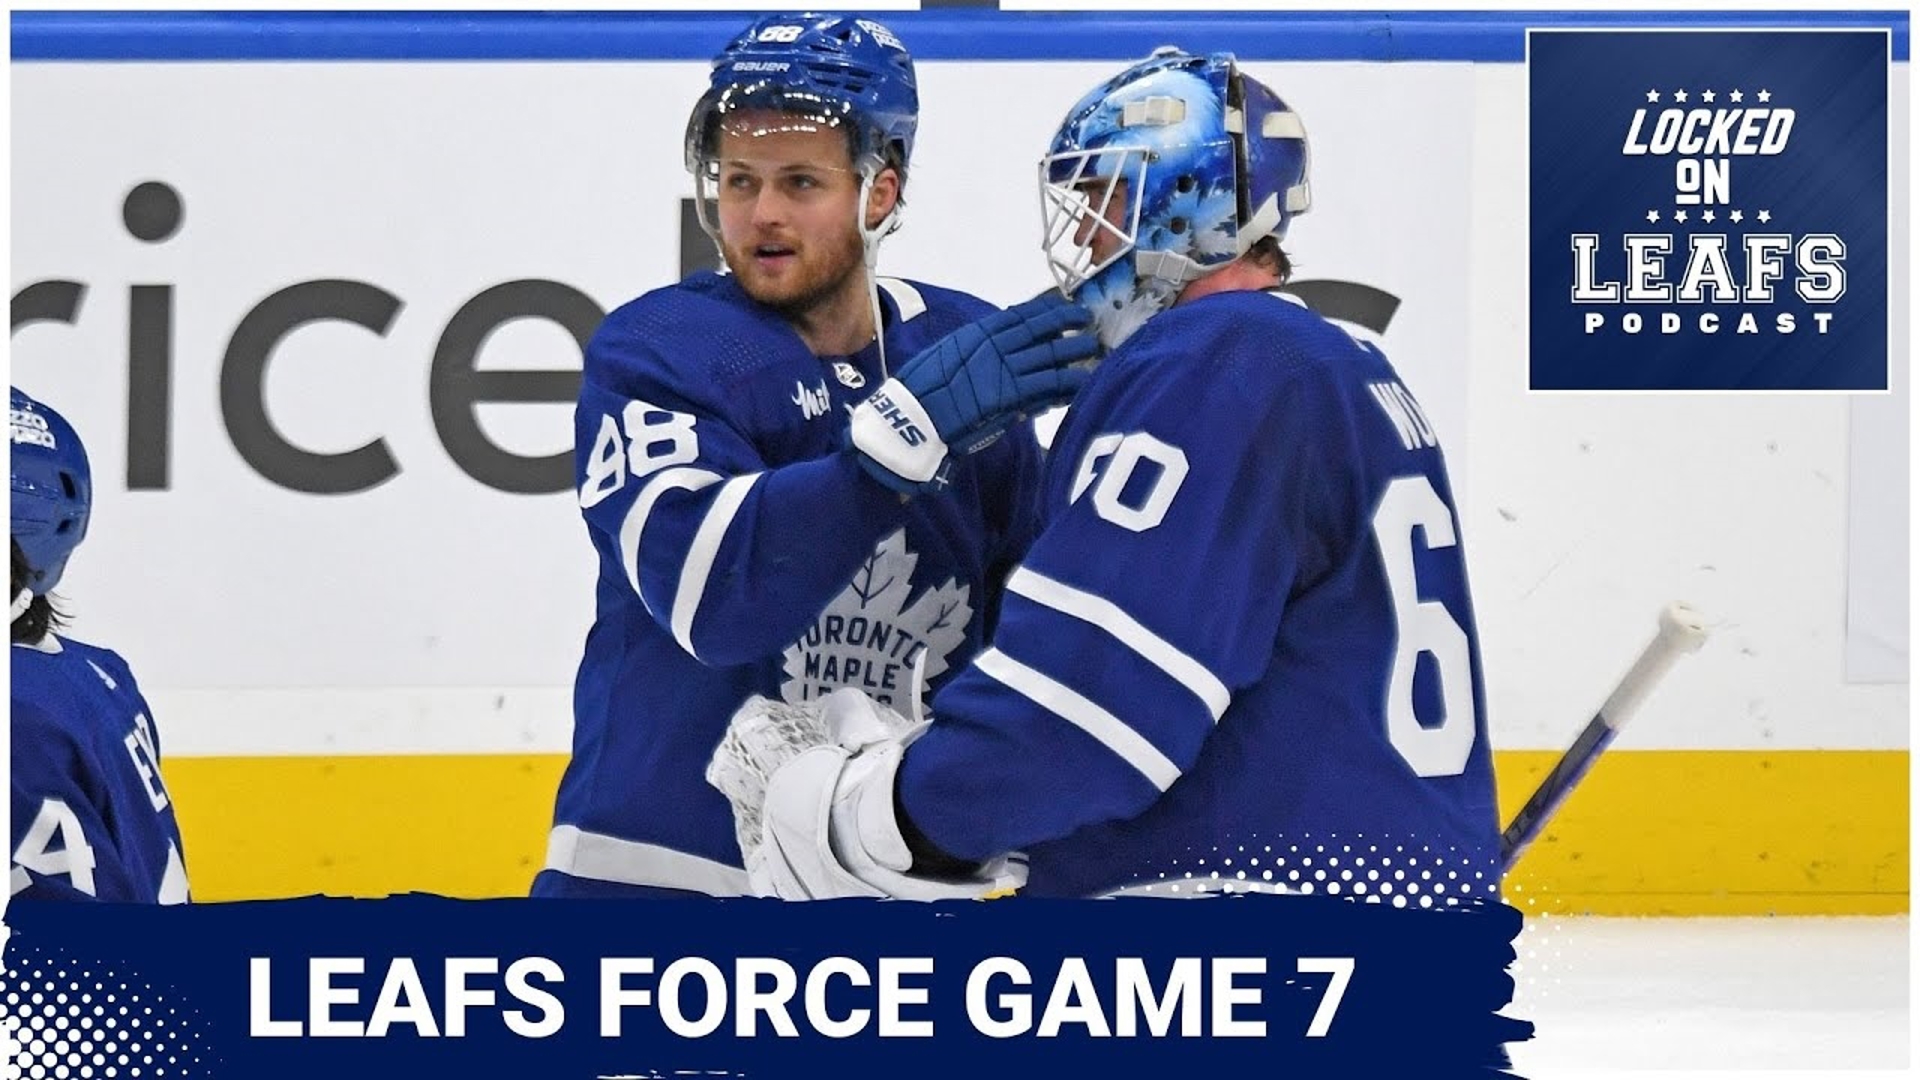 The Toronto Maple Leafs are heading back to Boston for Game 7! Mike DiStefano and David Morassutti give their thoughts on Toronto flipping the script on the Bruins.